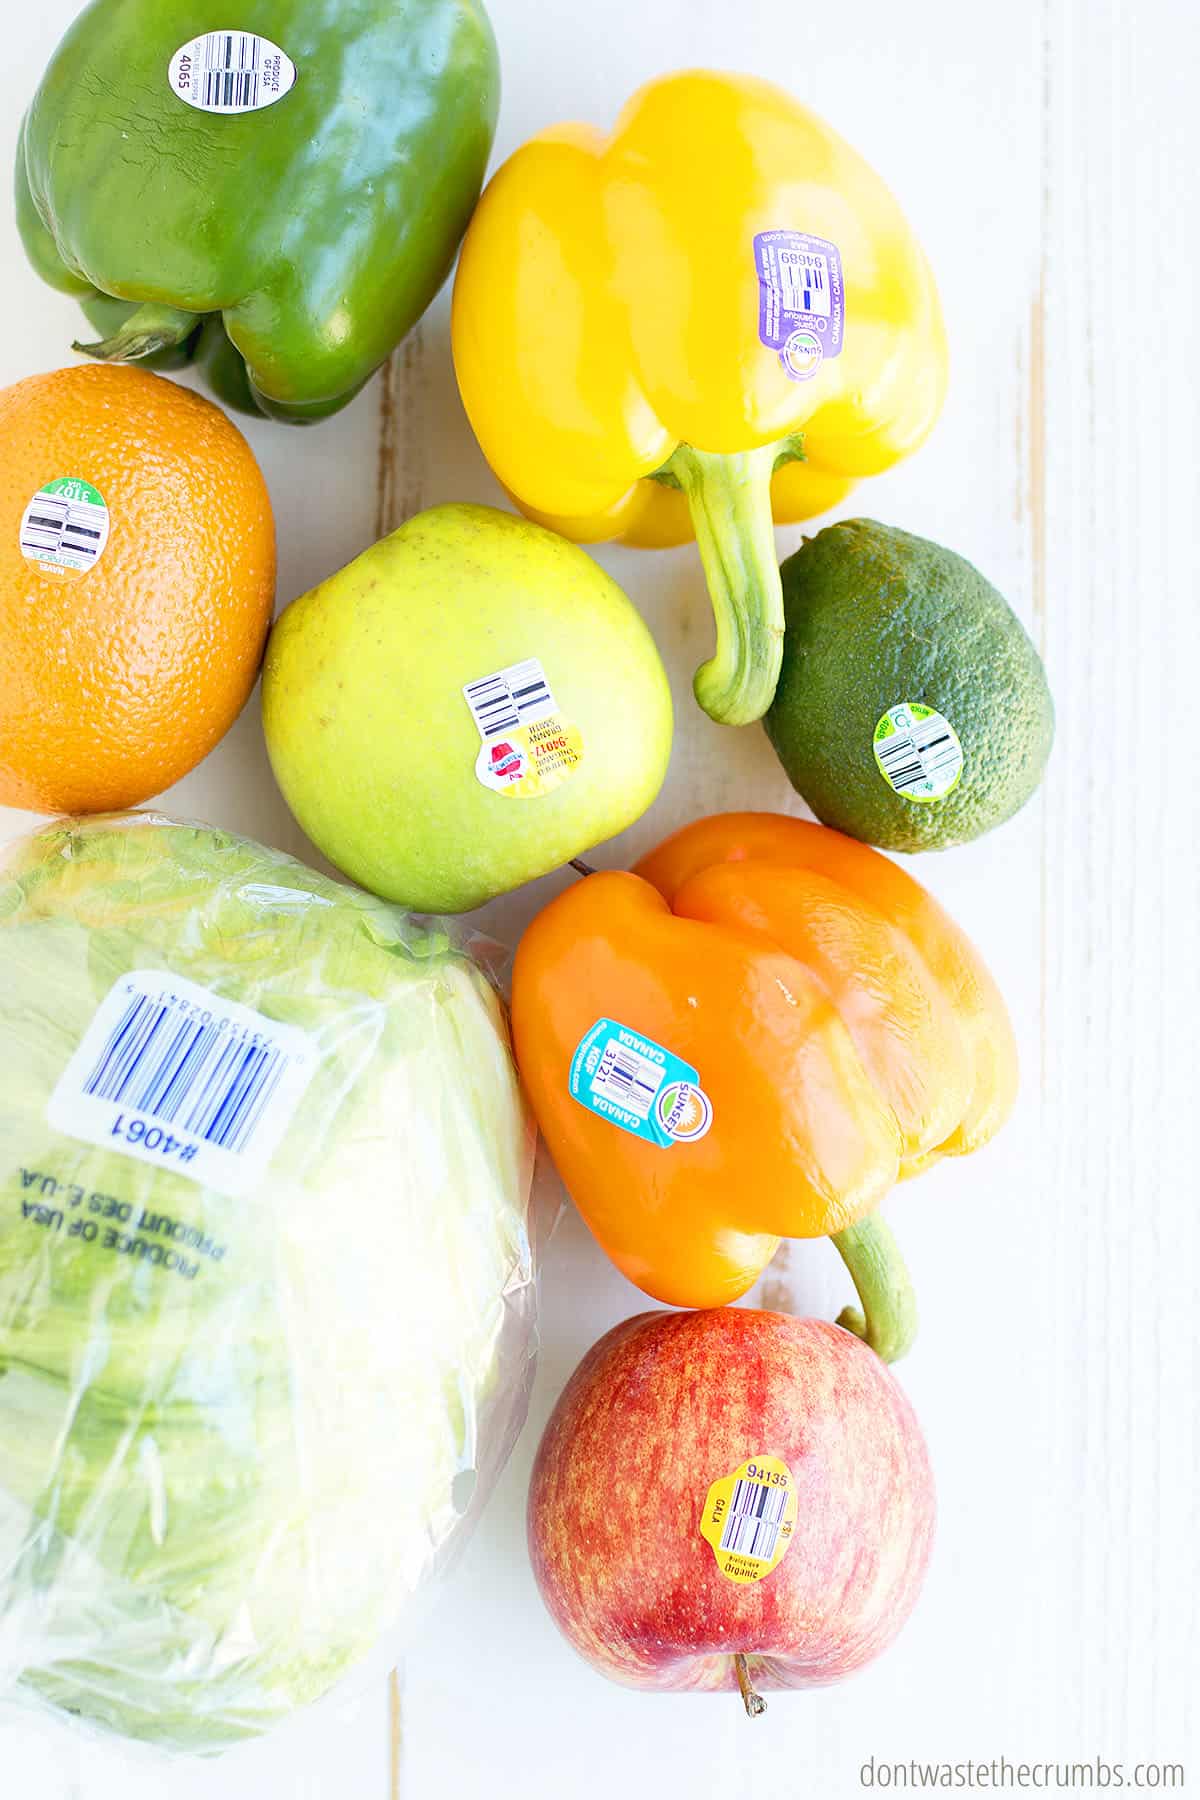 An orange, green pepper, yellow bell pepper, avocado, green apple, orange bell pepper, and lettuce with PLU stickers on them on a table.